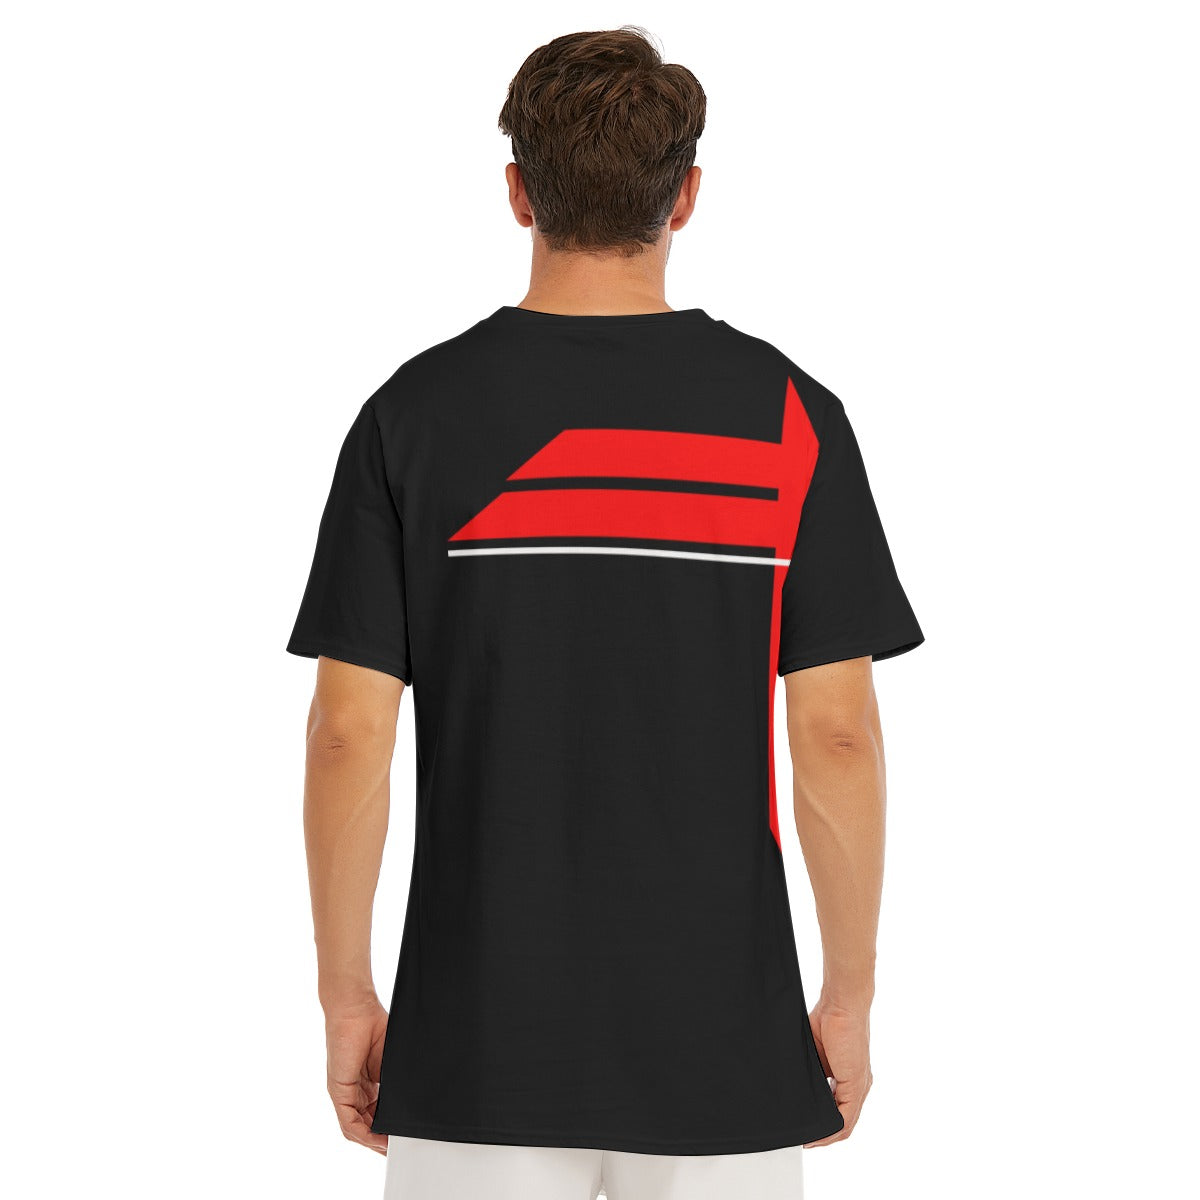 KTG13 TV Black and Red T-Shirt